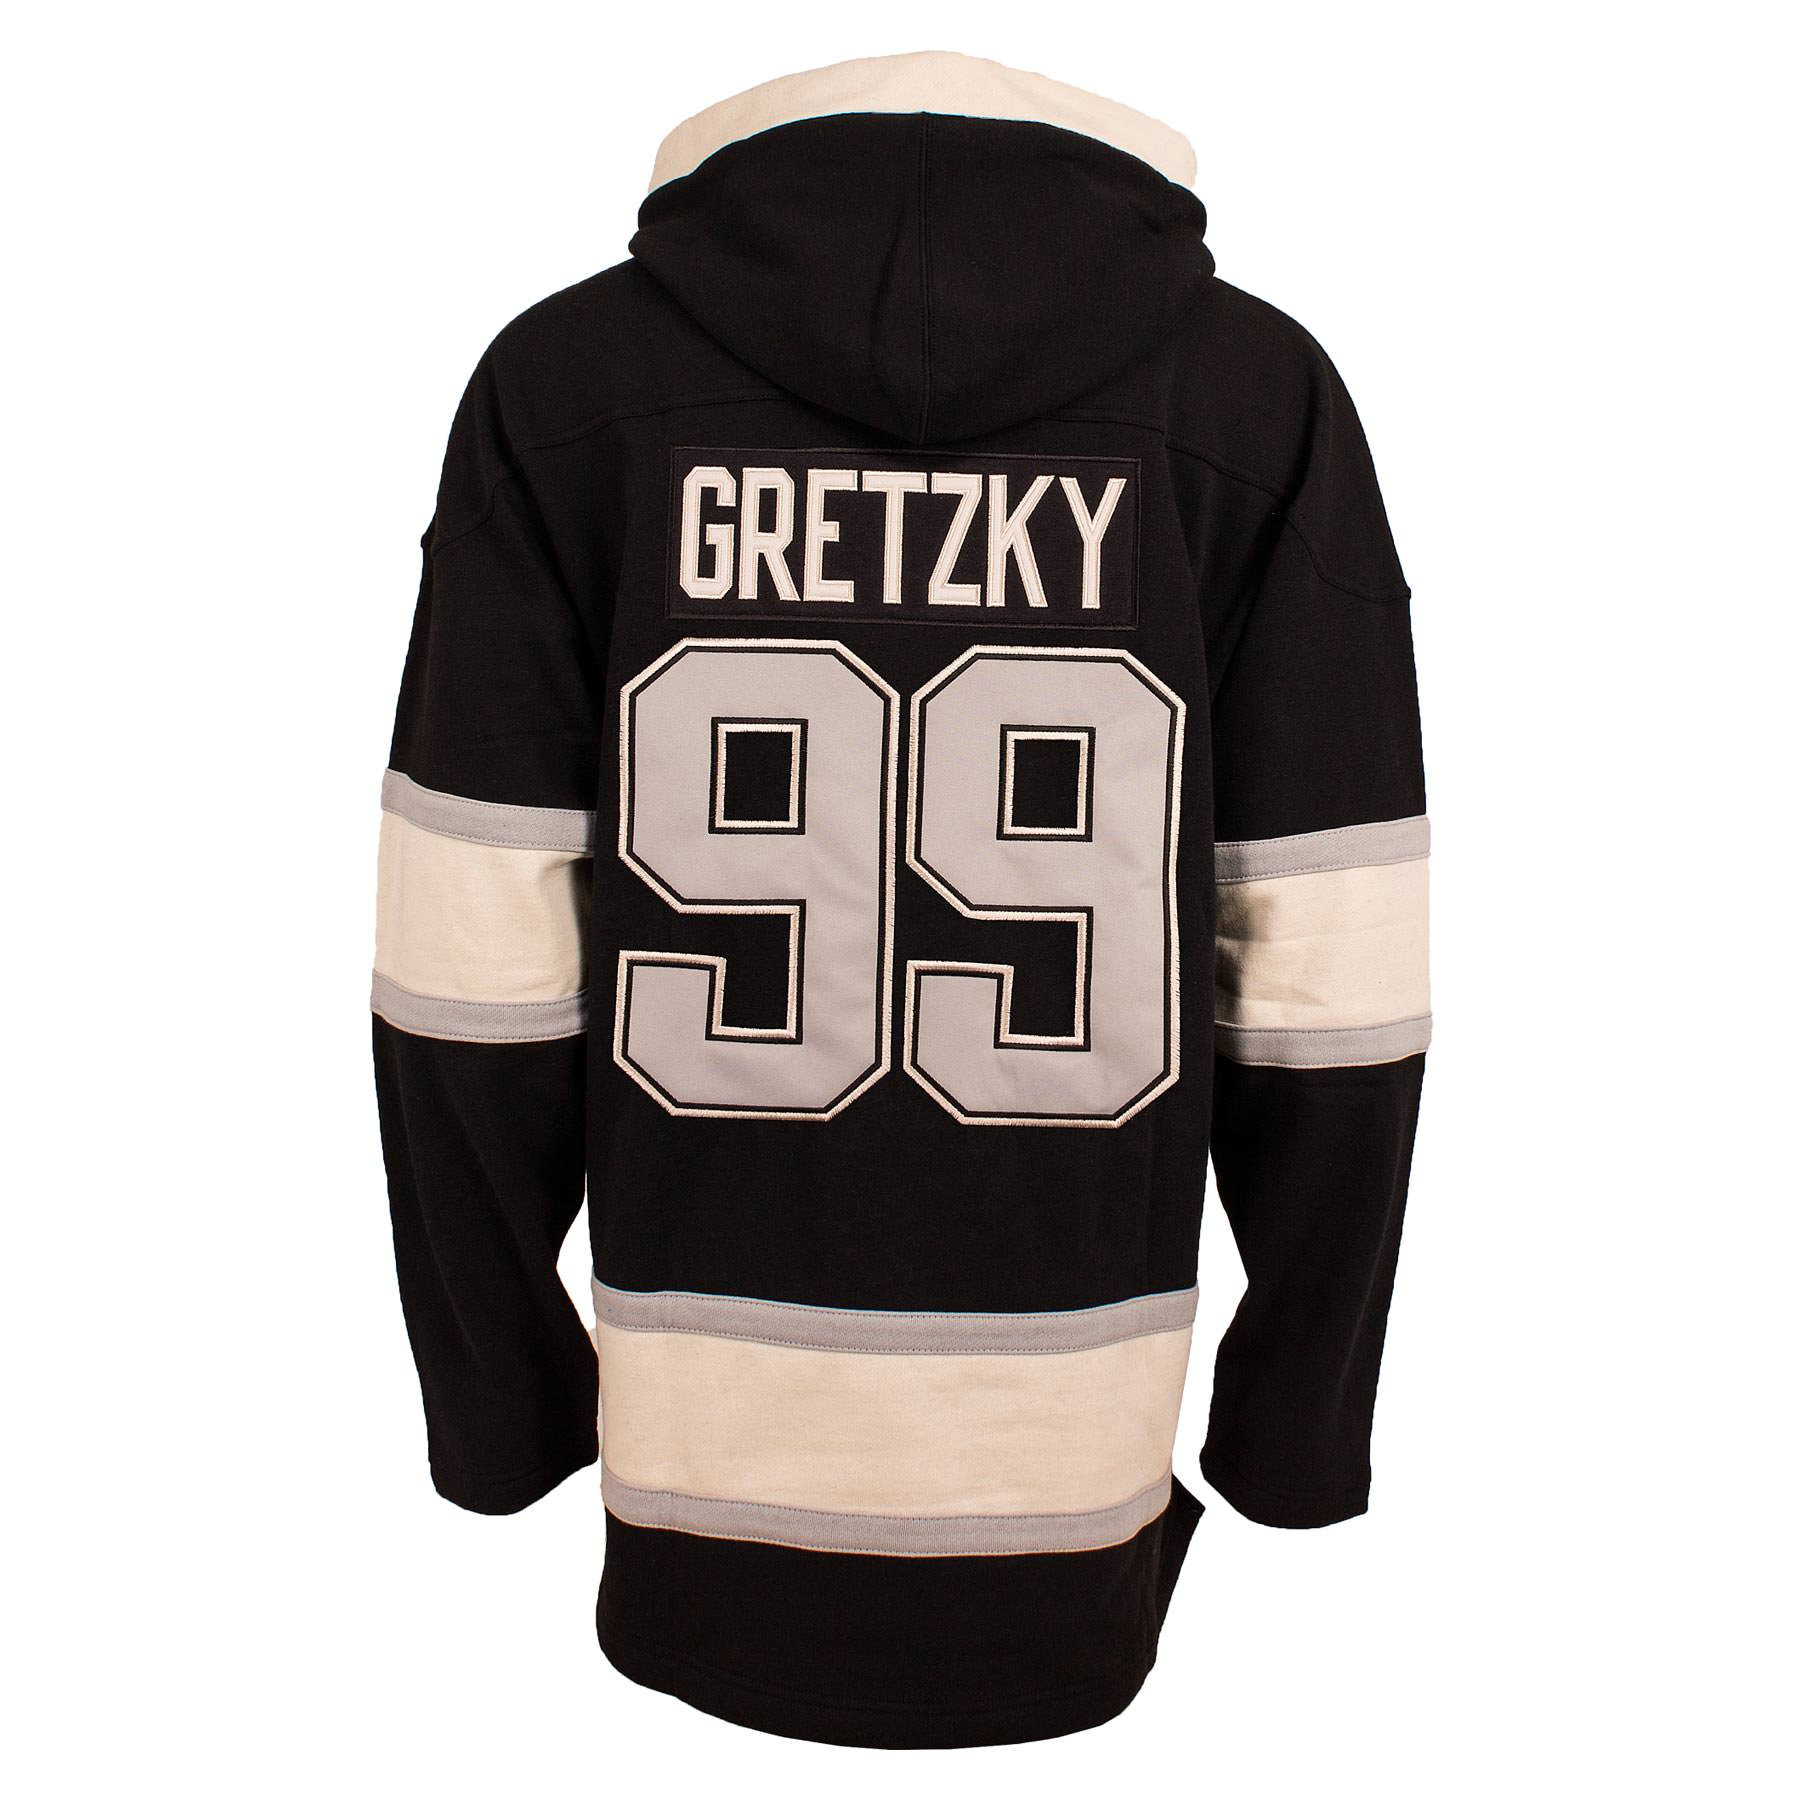 gretzky-kings-jersey-vancouver-canada